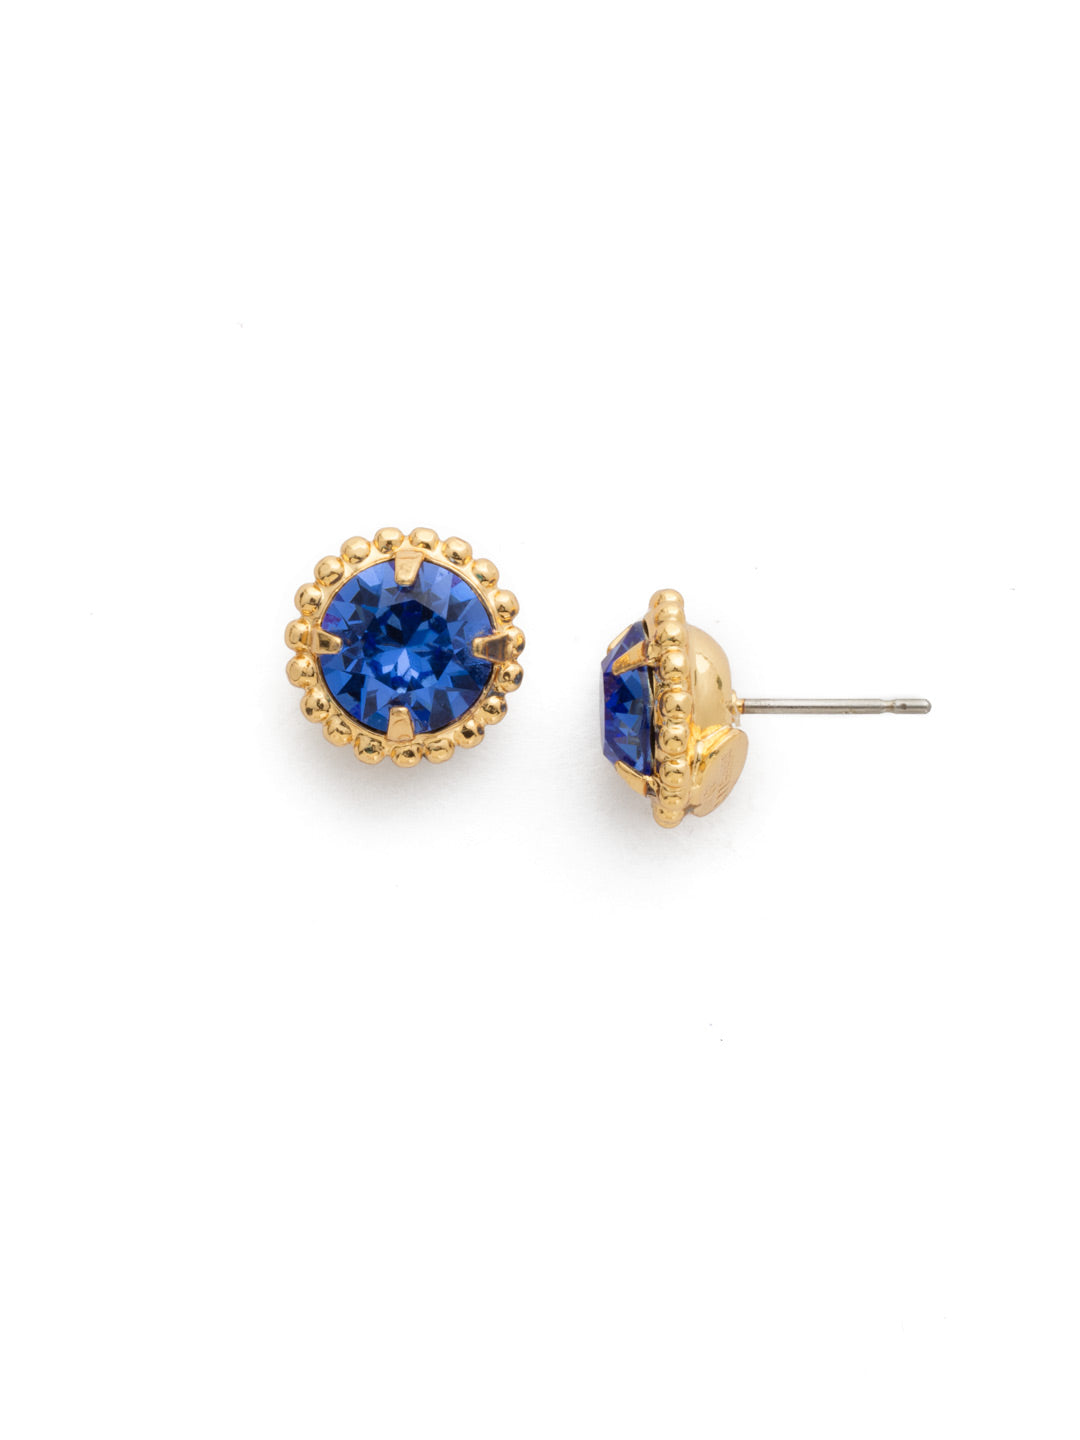 Simplicity Stud Earrings - EBY38BGSAP - <p>A timeless classic, the Simplicity Stud Earrings feature round cut crystals in a variety of colors; accented with a halo of metal beaded detail. Need help picking a stud? <a href="https://www.sorrelli.com/blogs/sisterhood/round-stud-earrings-101-a-rundown-of-sizes-styles-and-sparkle">Check out our size guide!</a> From Sorrelli's Sapphire collection in our Bright Gold-tone finish.</p>